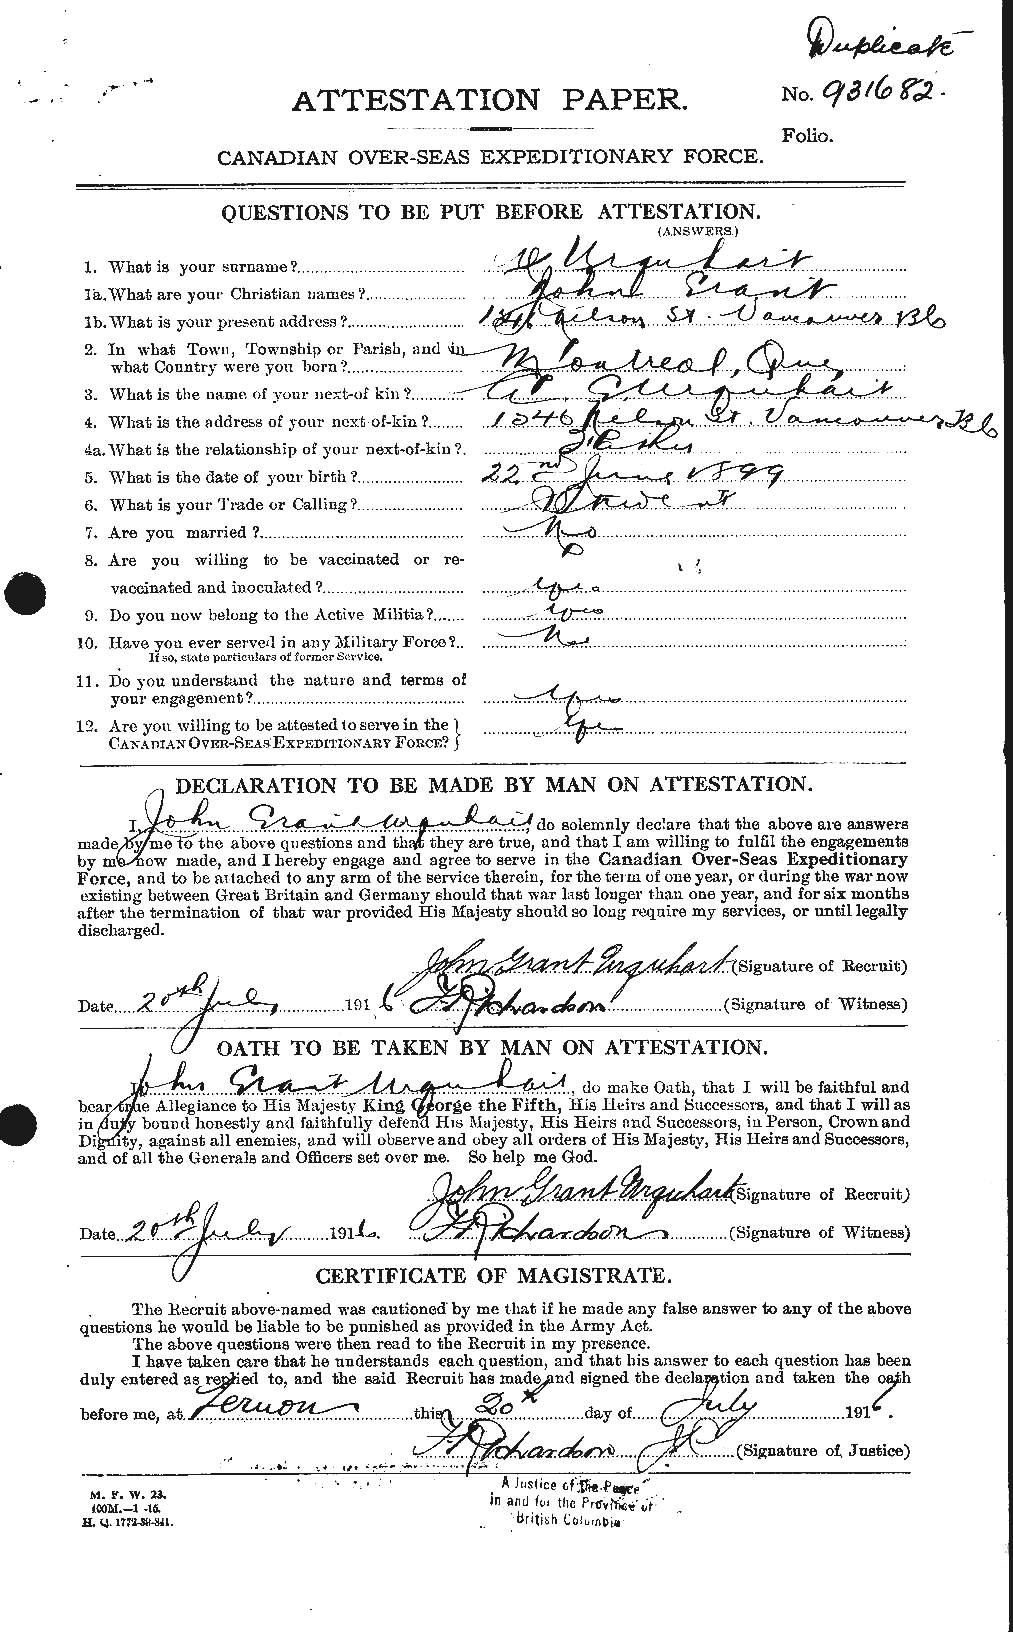 Personnel Records of the First World War - CEF 643375a